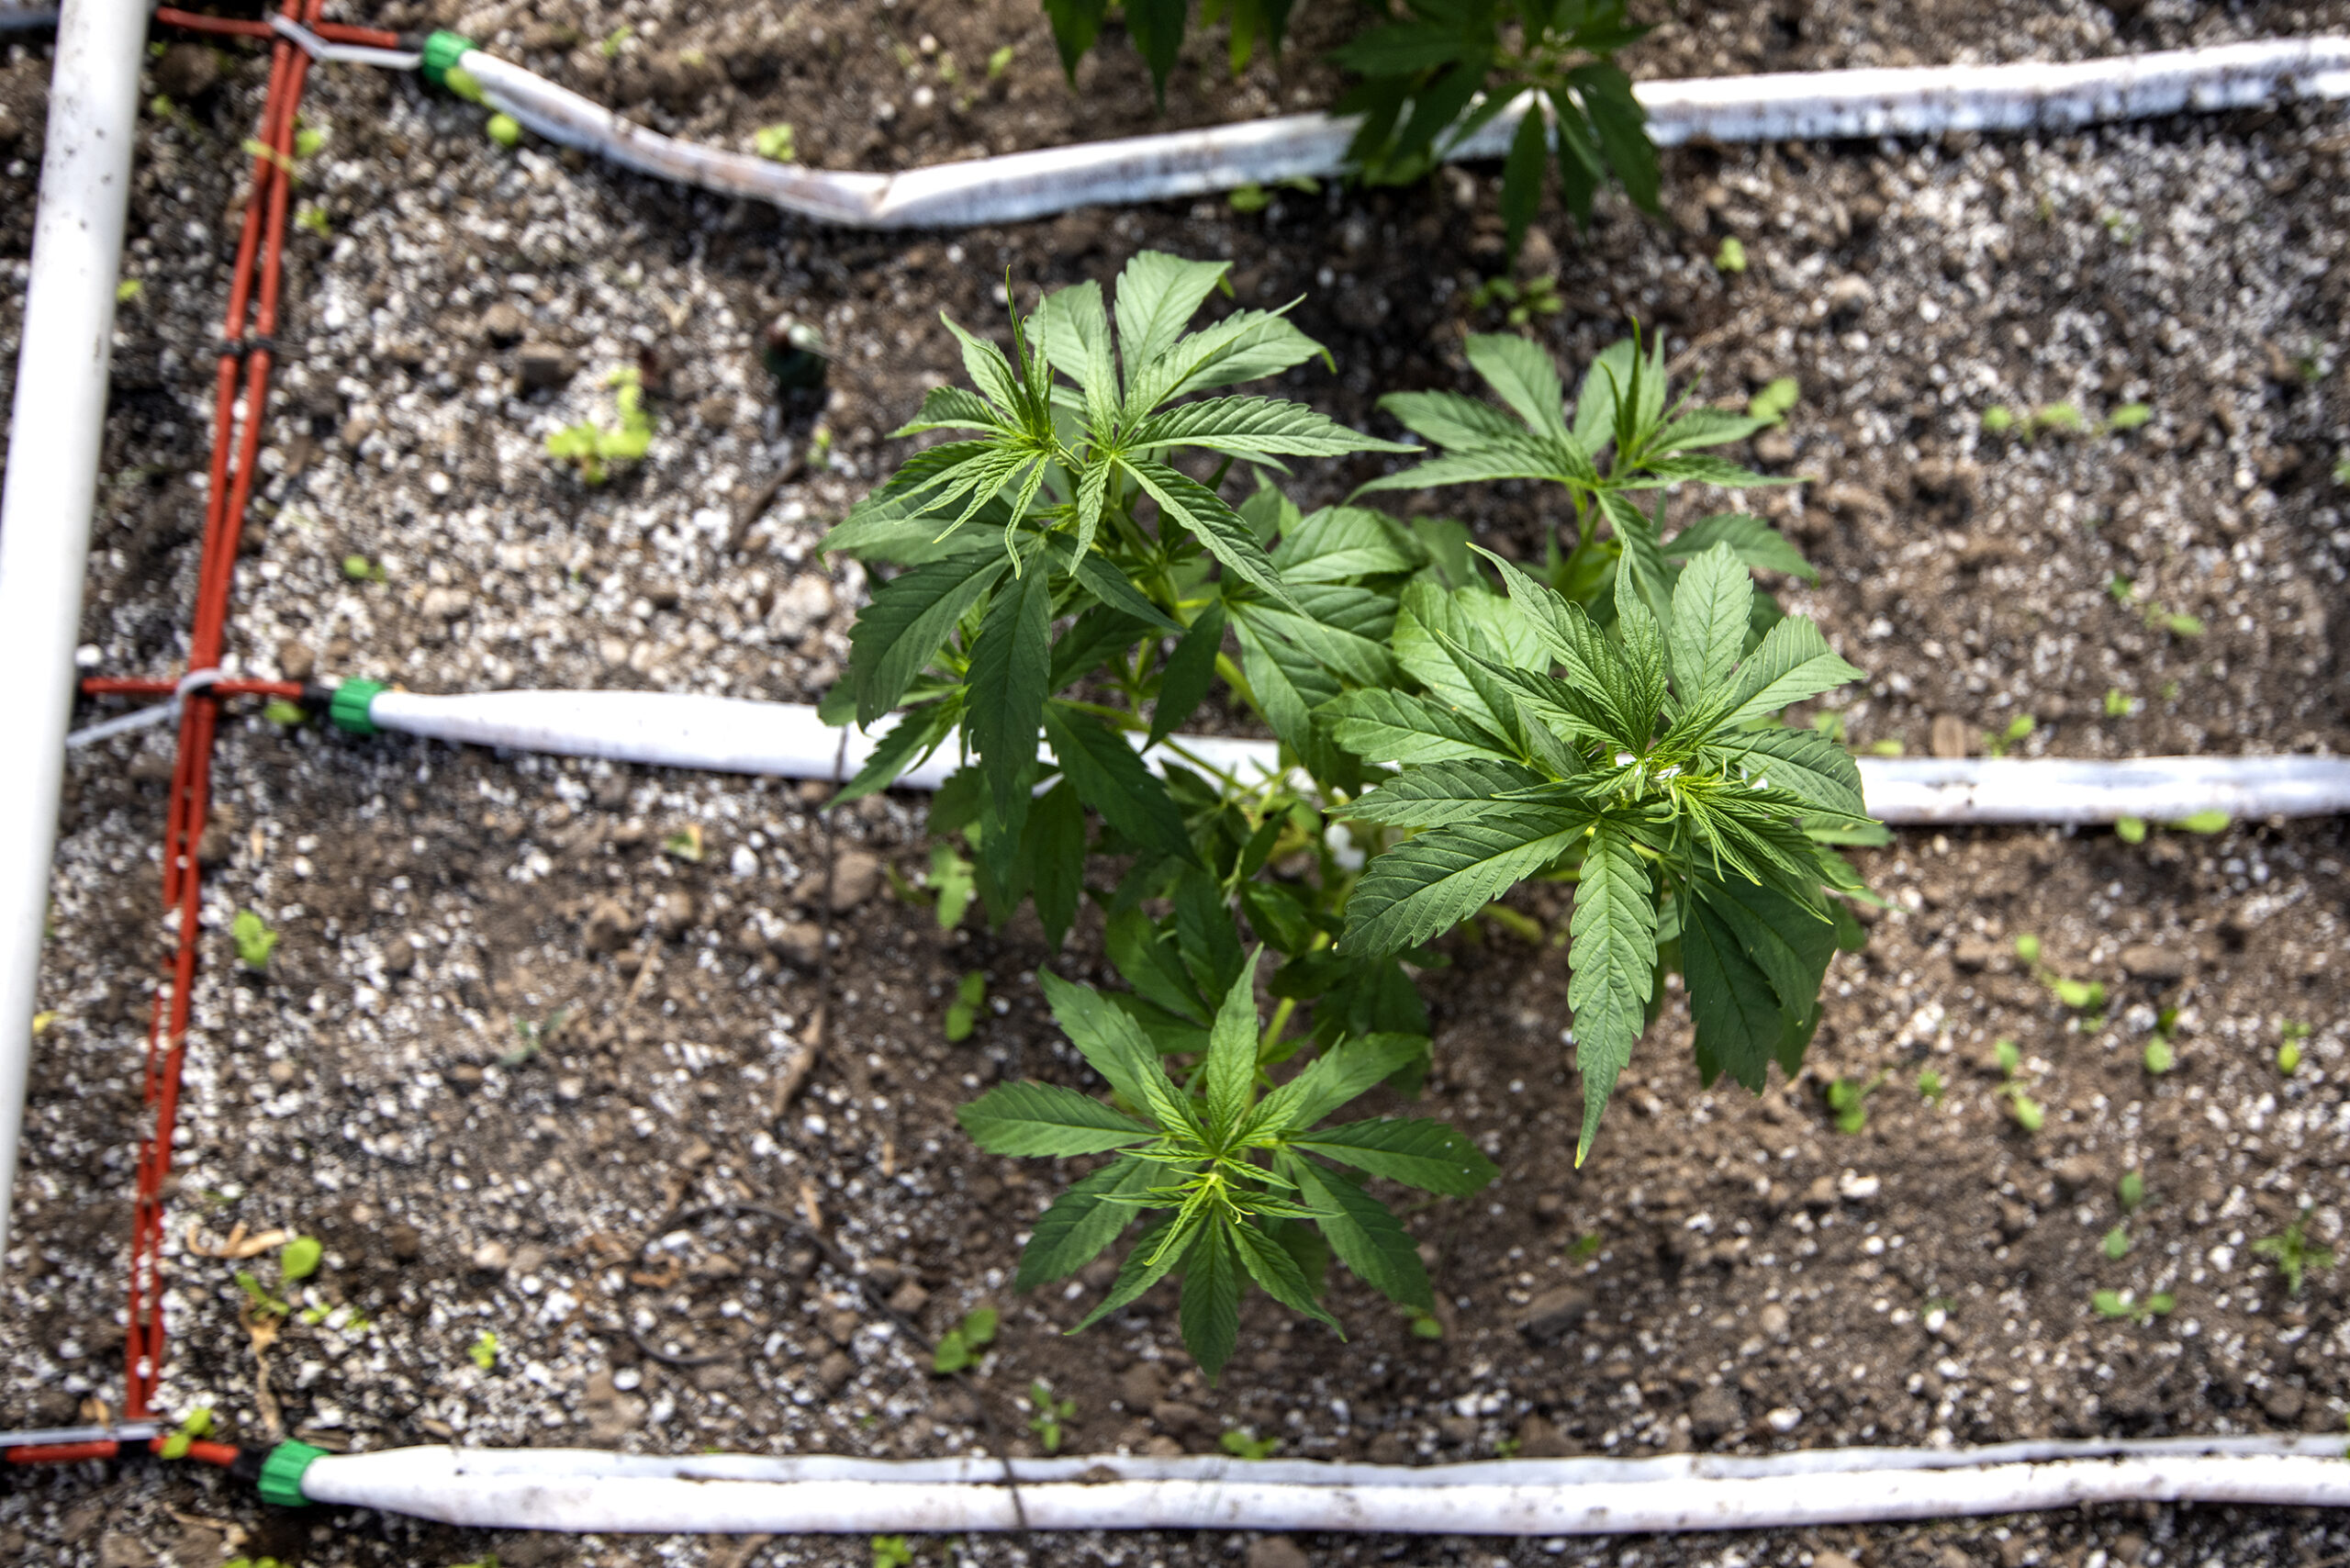 Green leaves of a hemp plant can be seen from above.